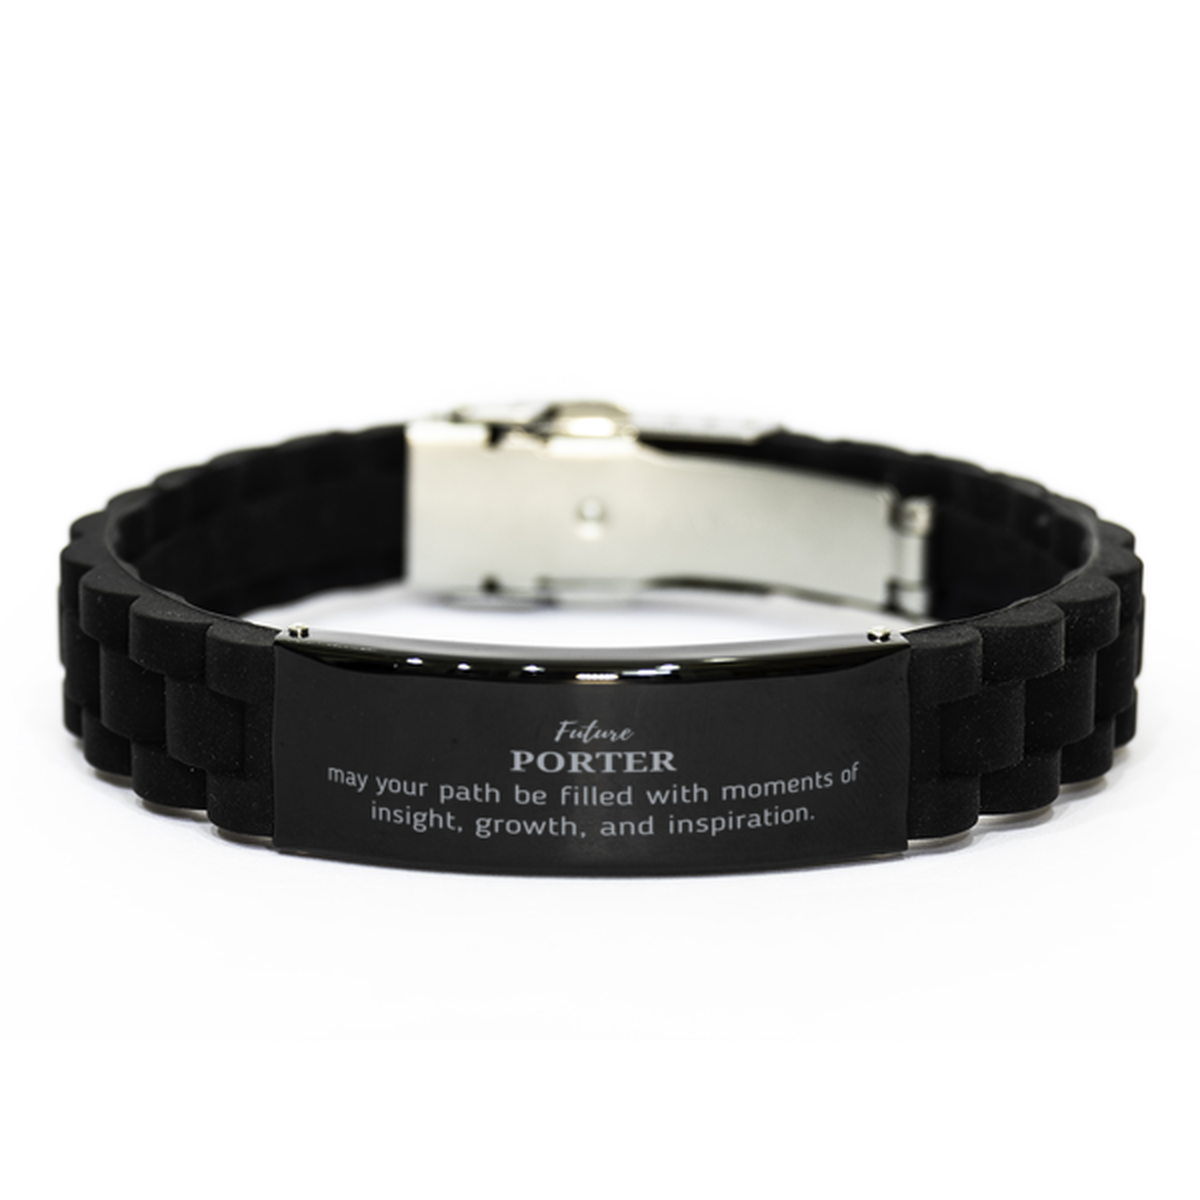 Future Porter Gifts, May your path be filled with moments of insight, Graduation Gifts for New Porter, Christmas Unique Black Glidelock Clasp Bracelet For Men, Women, Friends